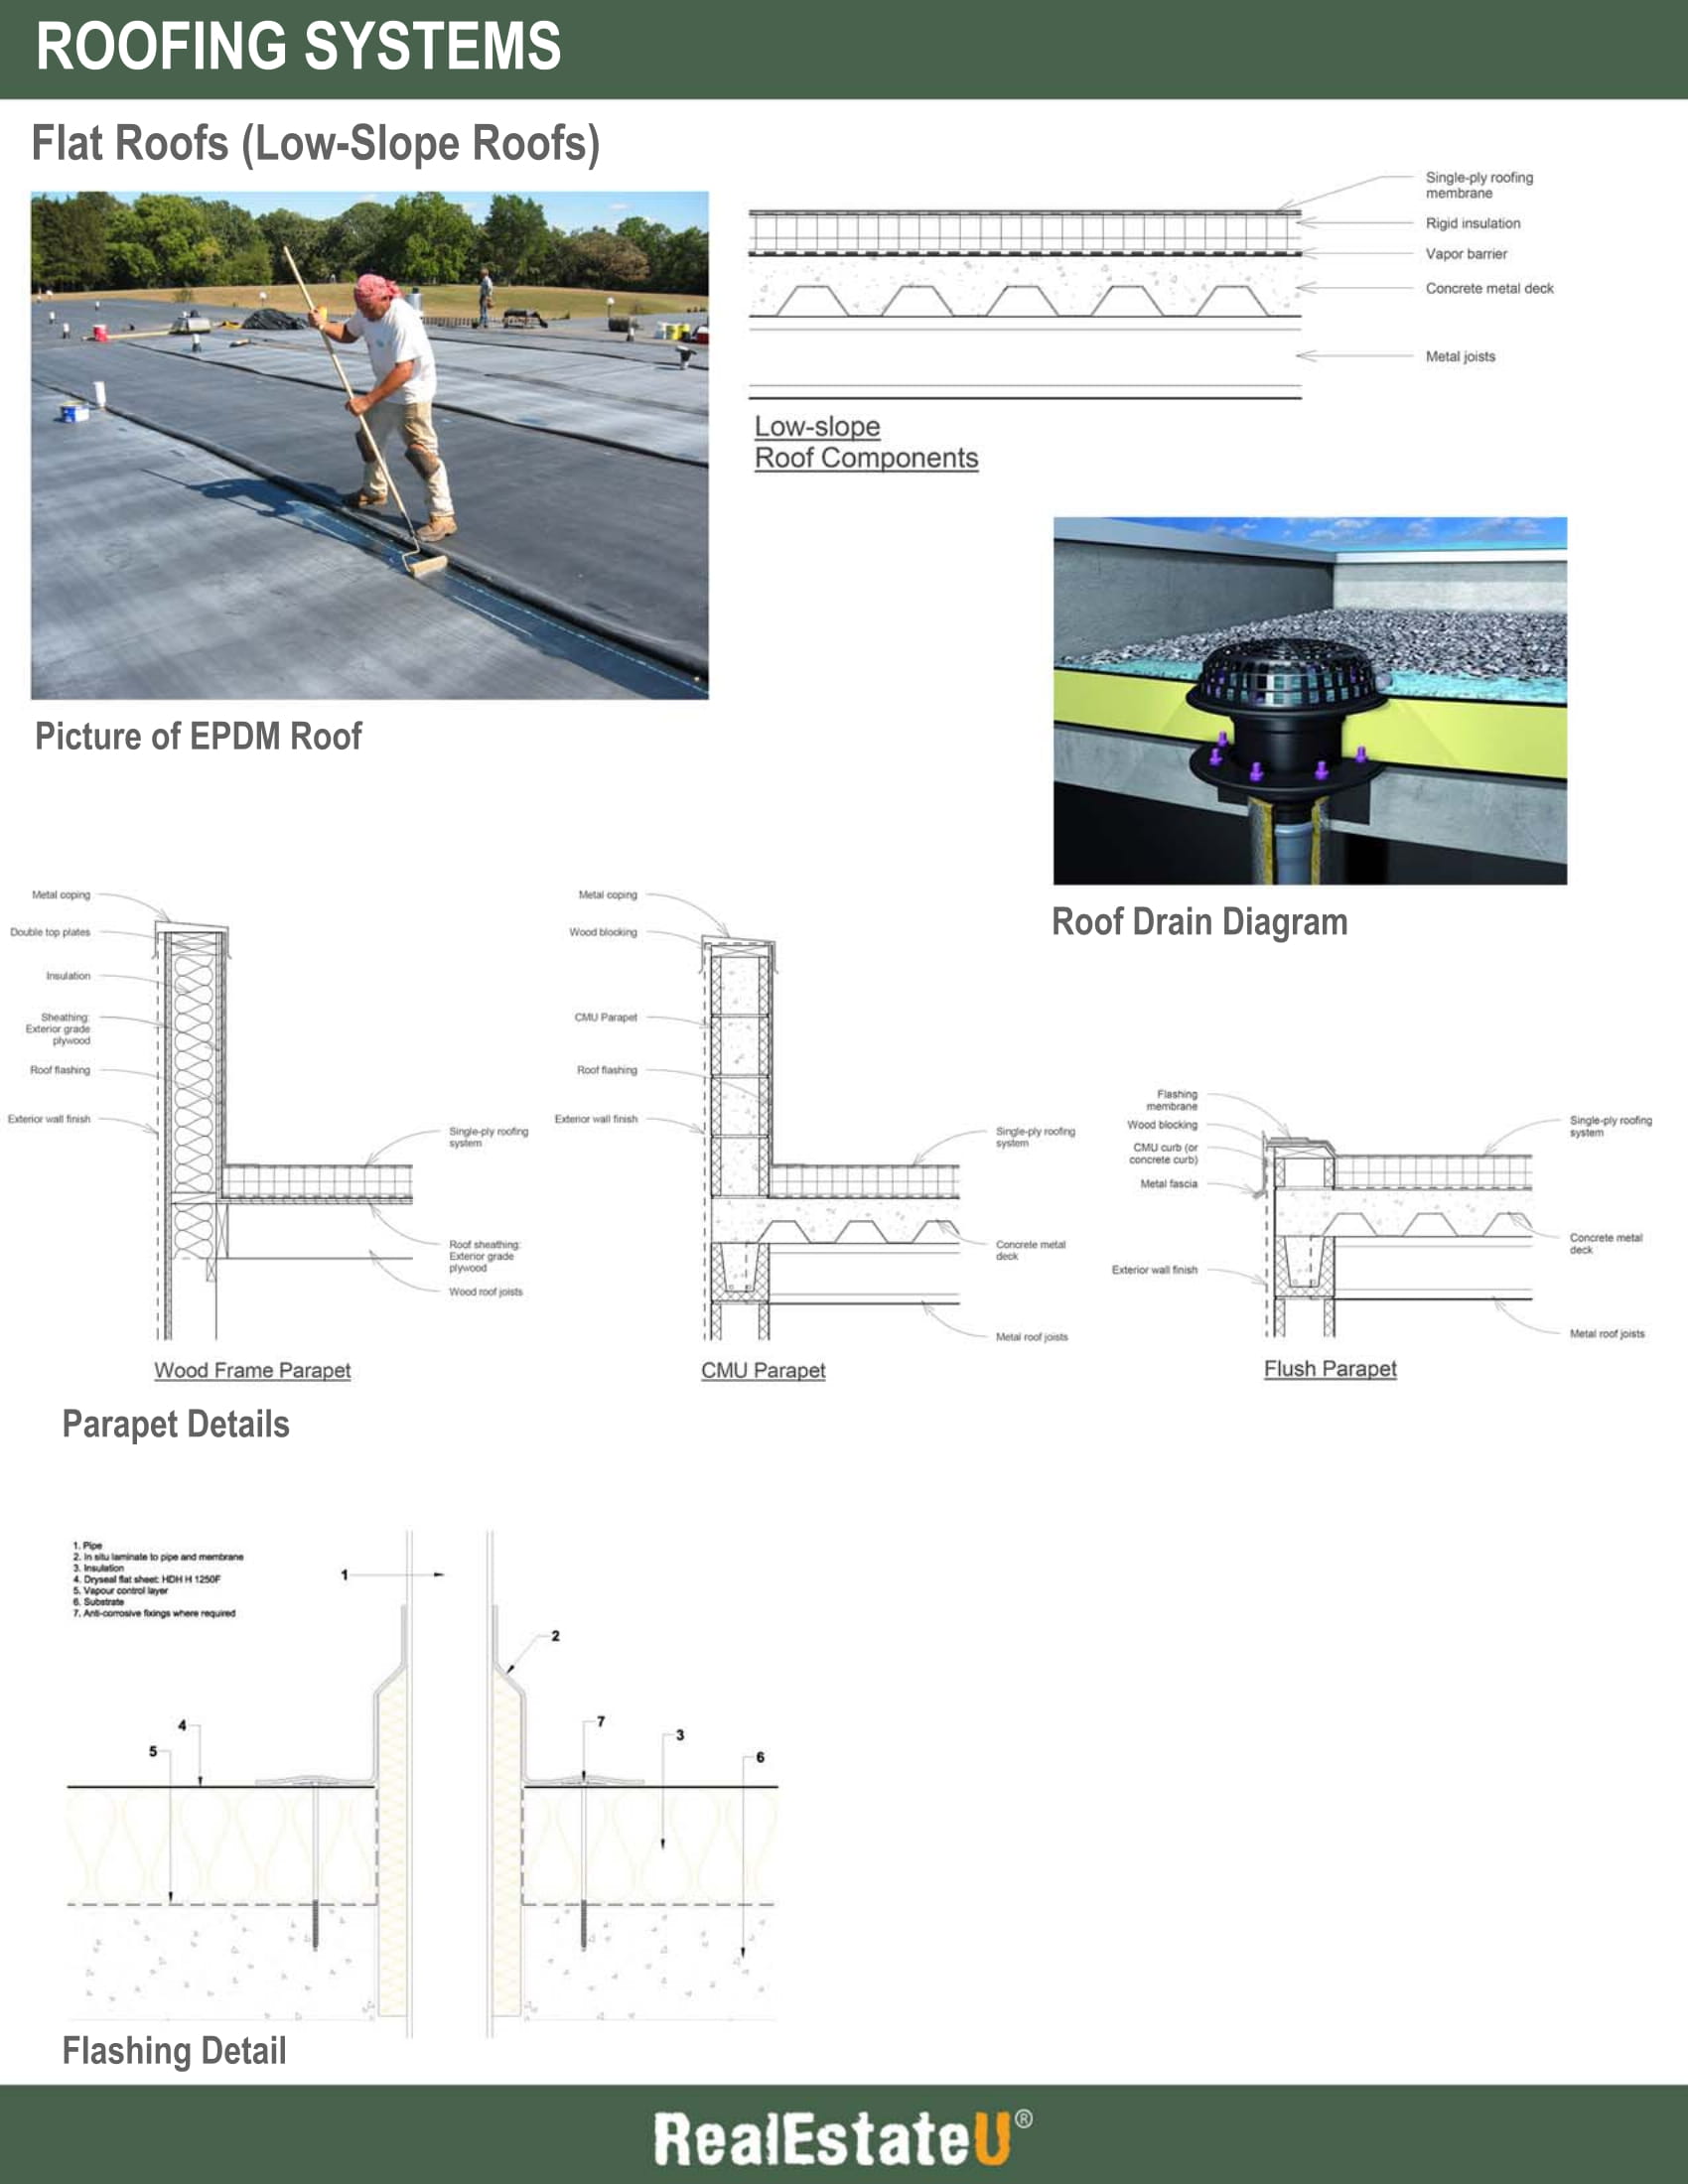 Roofing Systems 1.